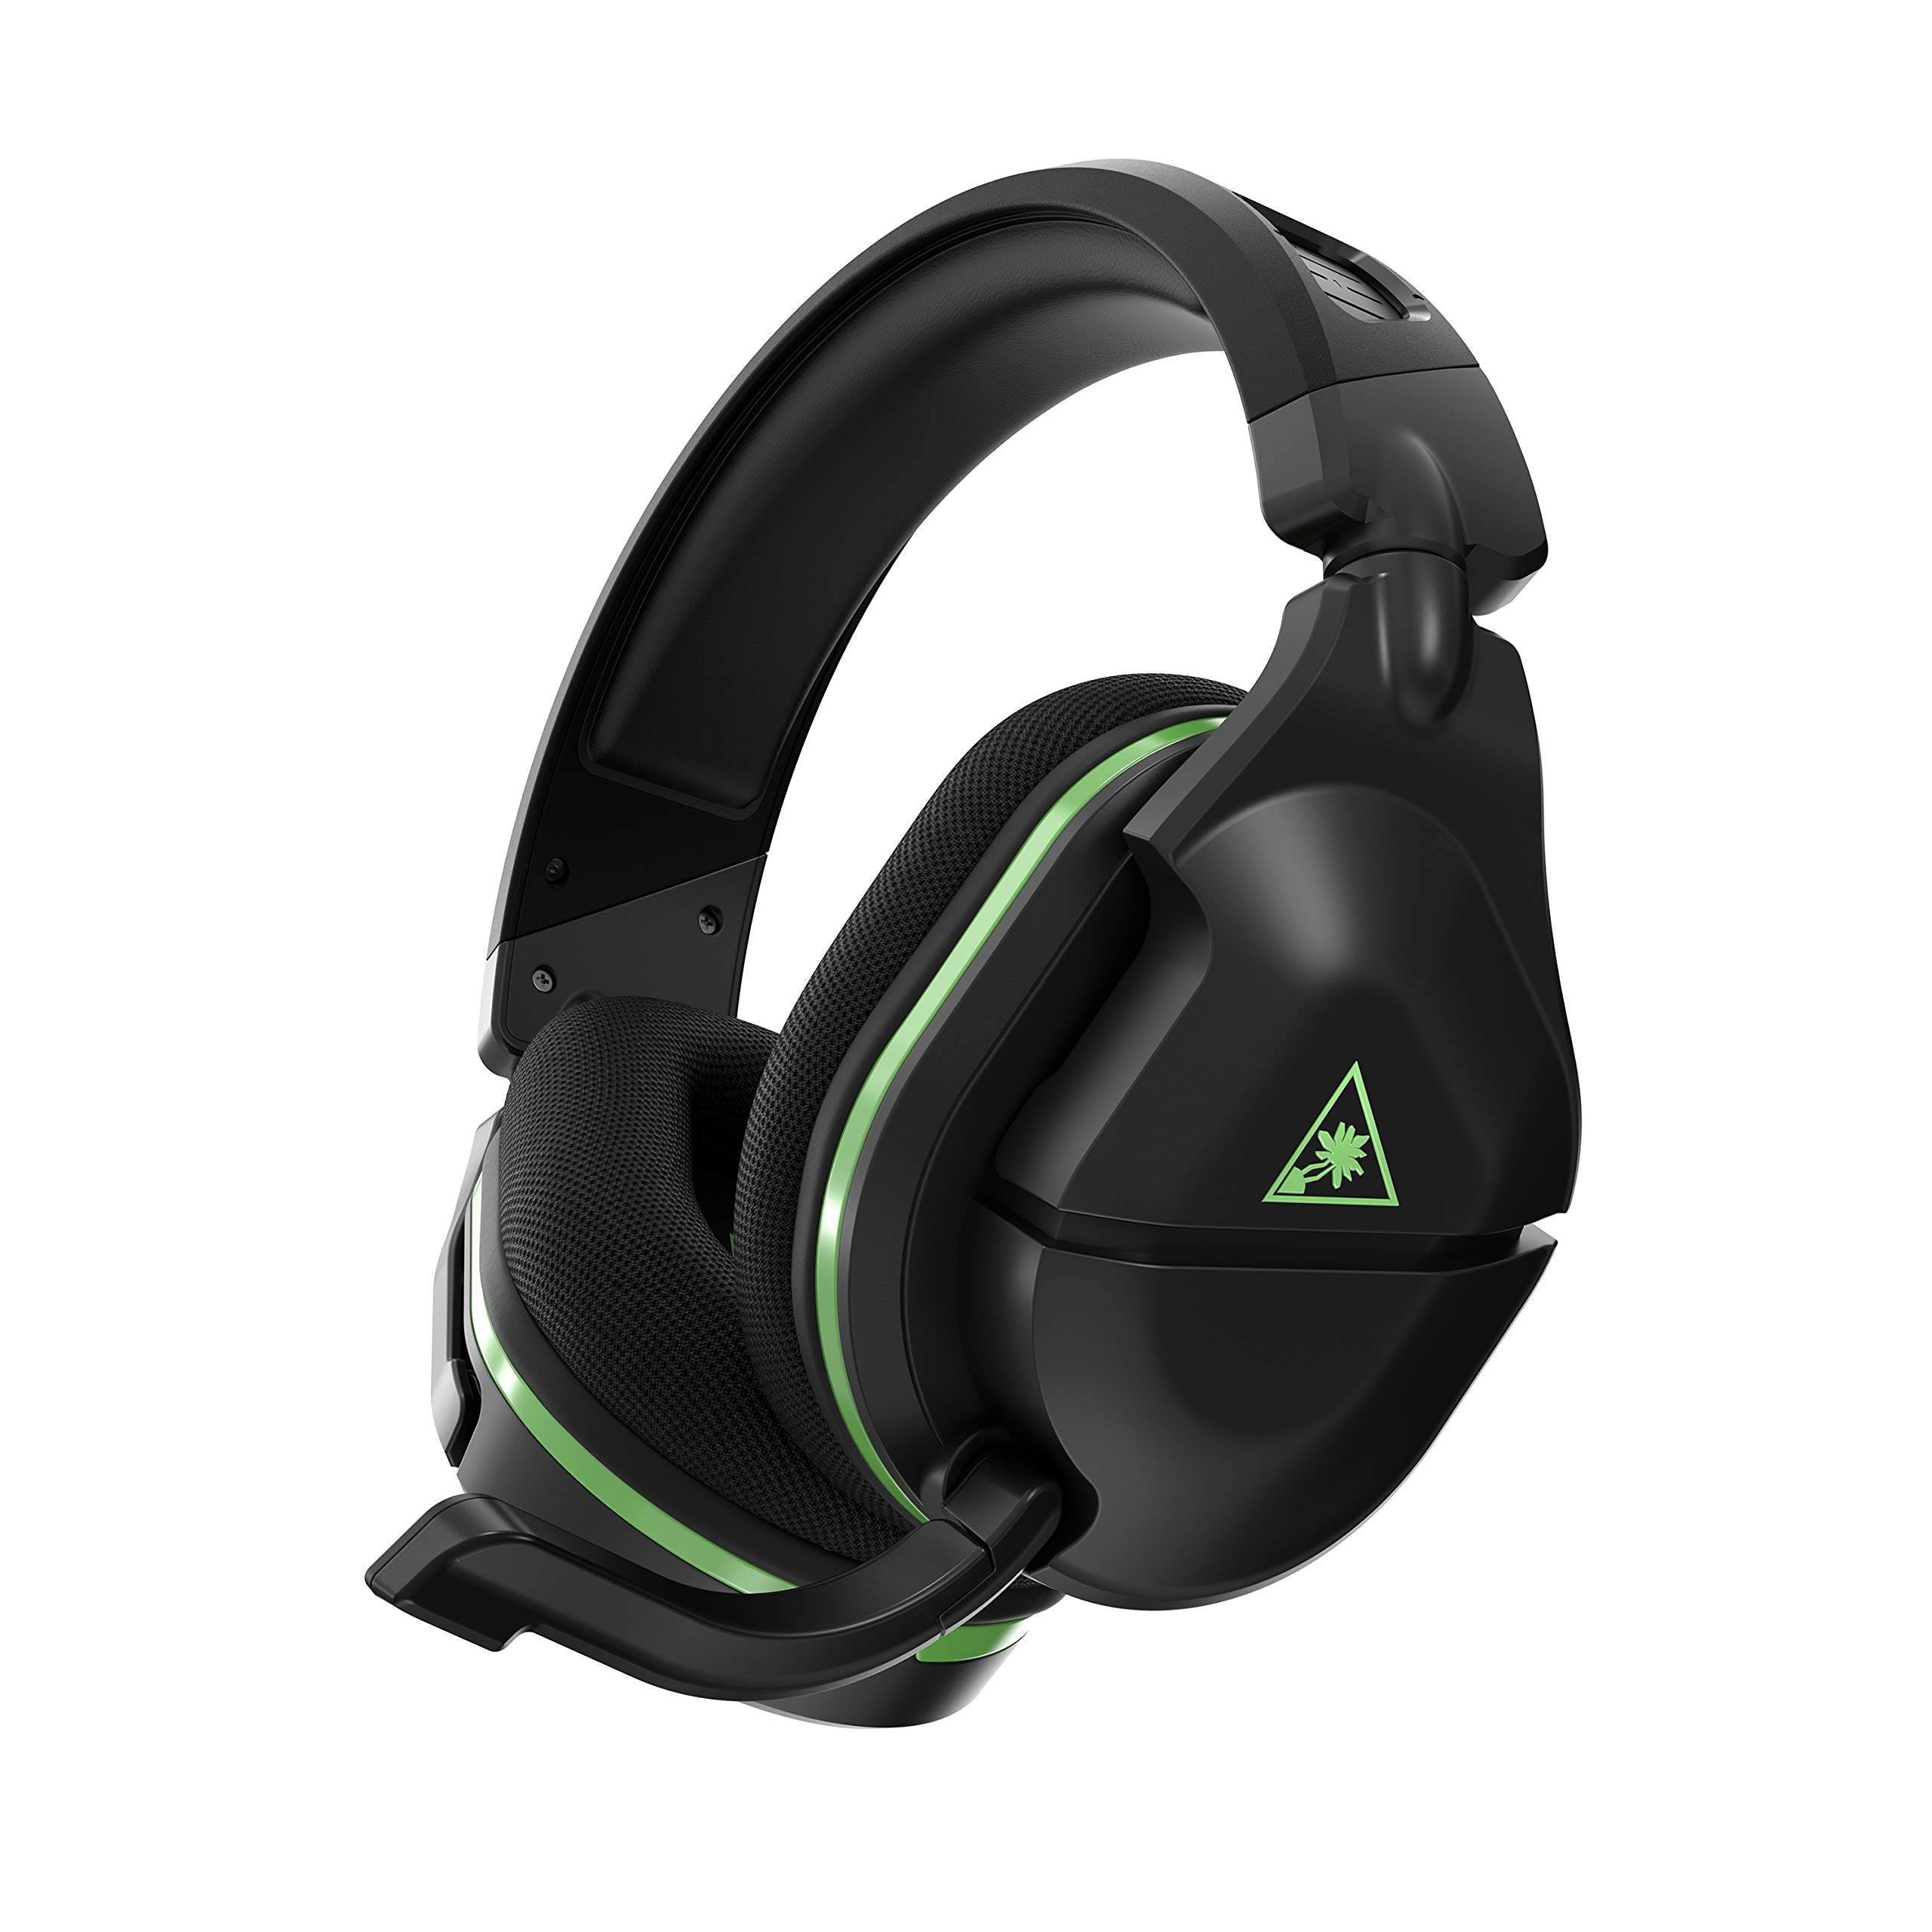 Turtle Beach Stealth 600 Gen 2 USB Wireless Amplified Gaming Headset - Licensed for Xbox Series X|S & Xbox One - 24+ Hour Battery, 50mm Speakers, Flip-to-Mute Mic, Spatial Audio – Black (Renewed)